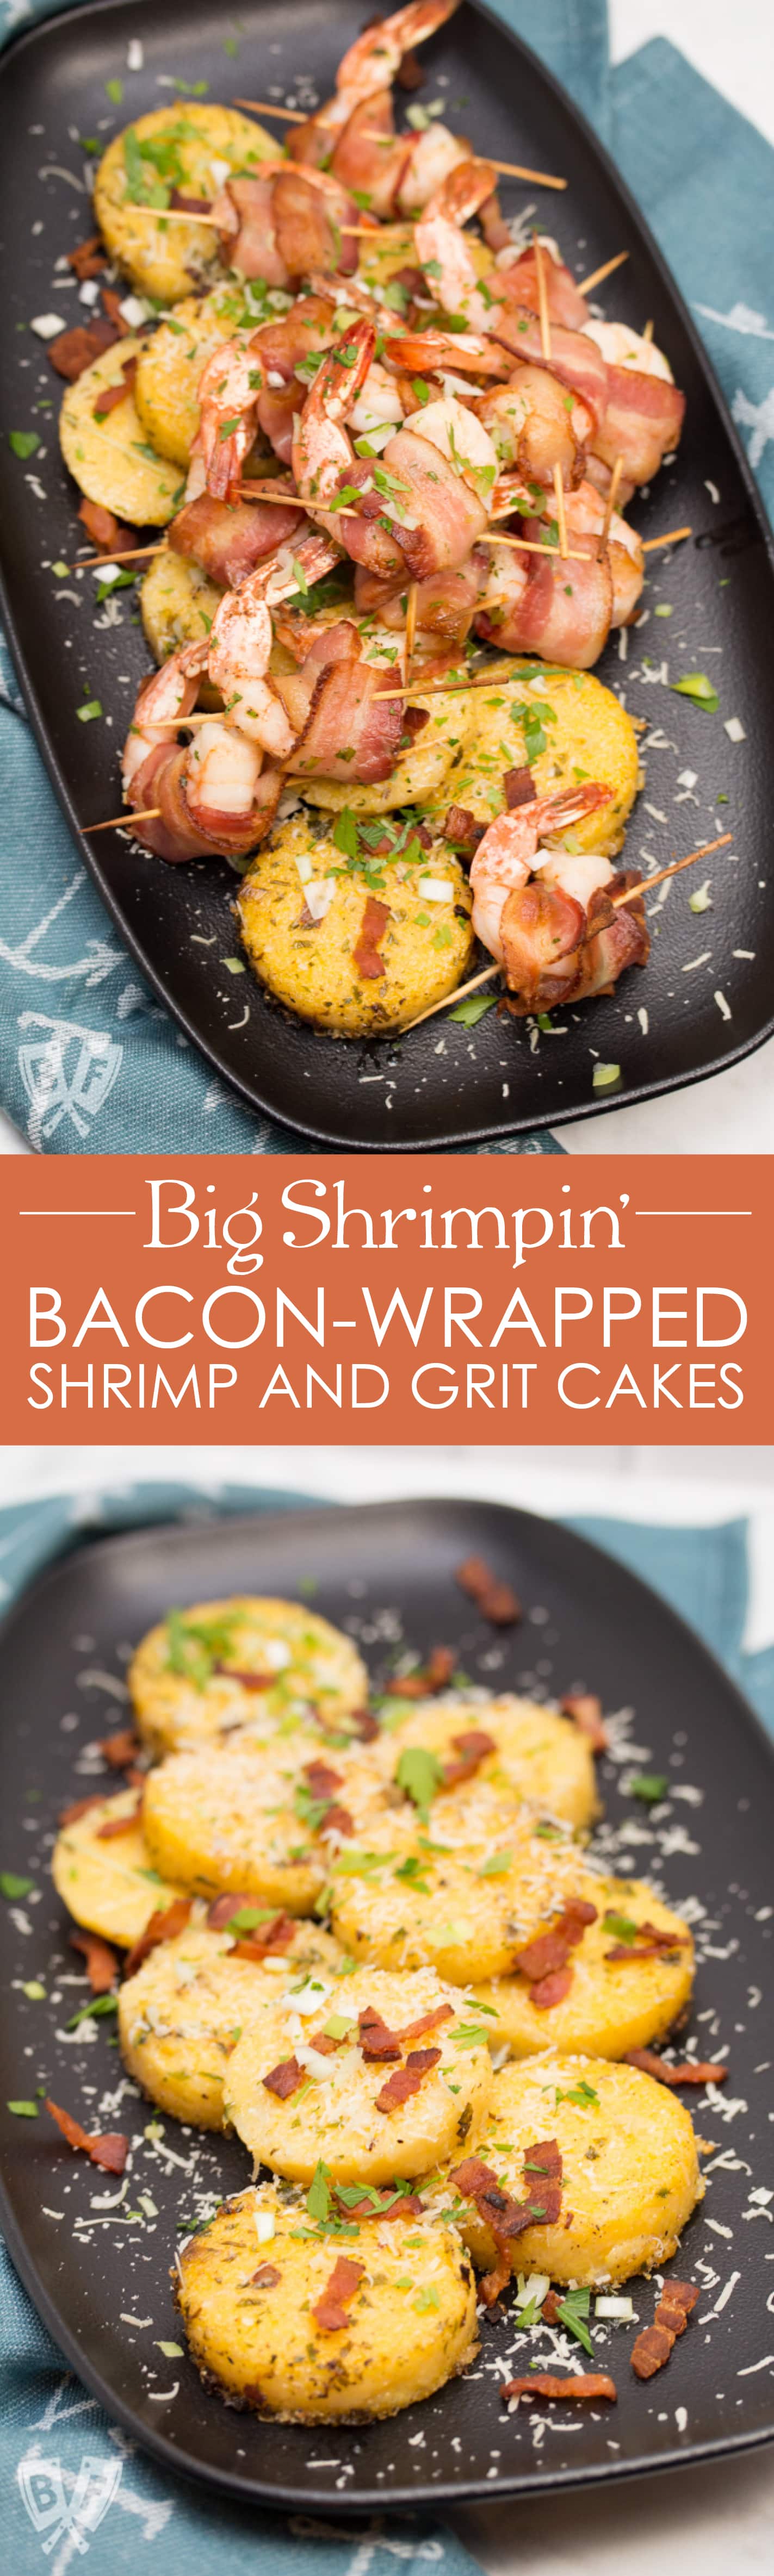 Big Shrimpin' Bacon-Wrapped Shrimp and Grit Cakes: Classic shrimp and grits gets an upscale makeover in this over-the-top, bacon-wrapped presentation. Easy, delicious, and sure to impress your dinner guests! #BaconMonth